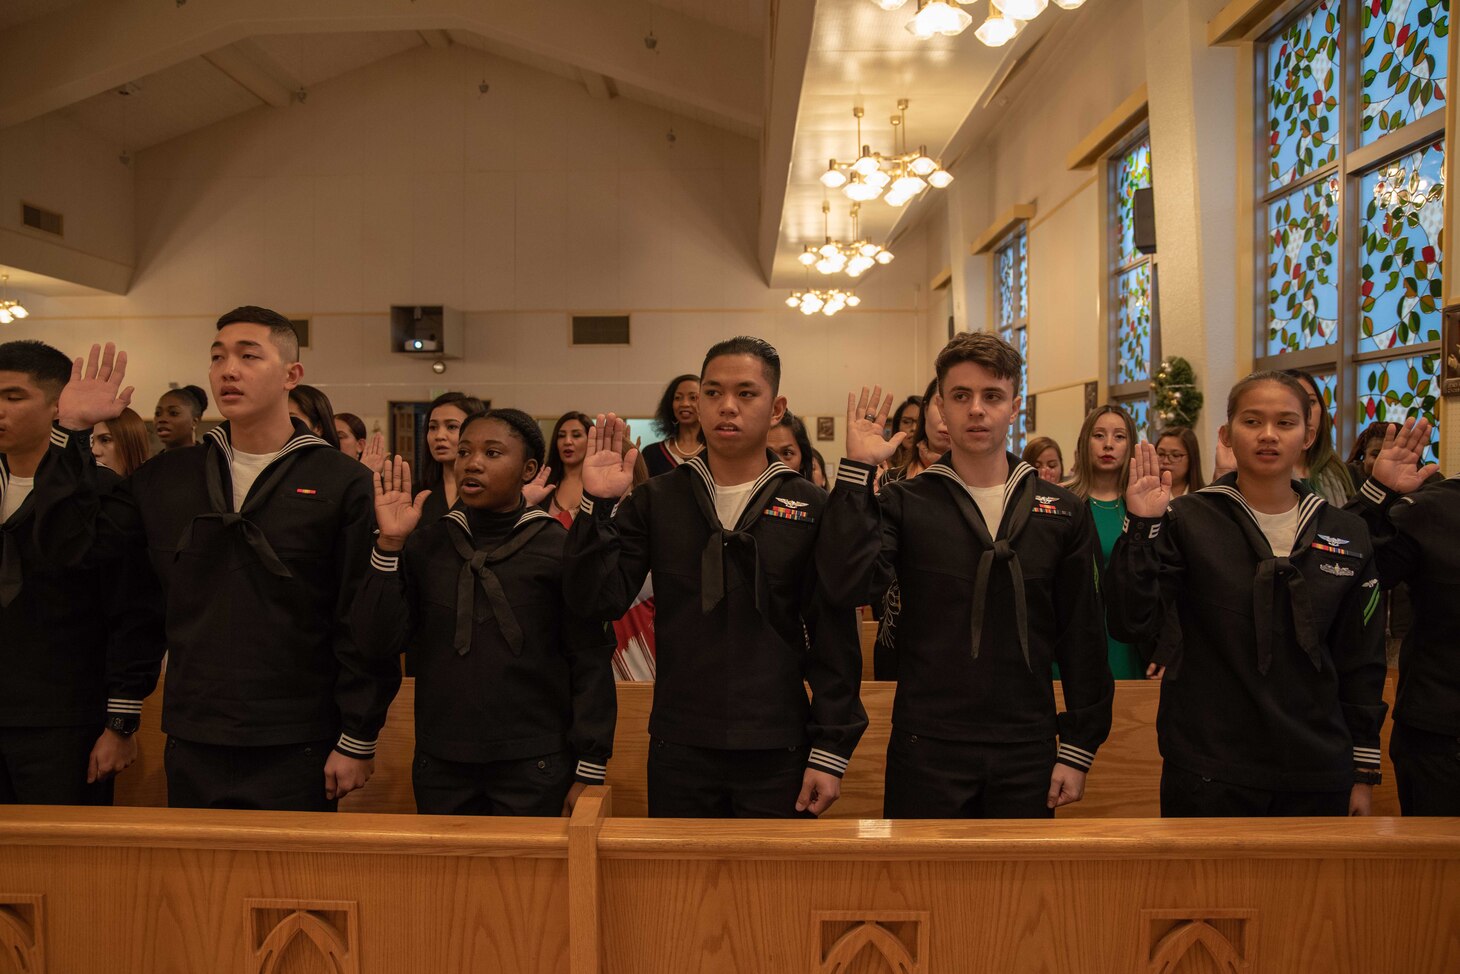 YOKOSUKA (Dec. 6, 2018) Sailors and dependents take the Oath of Allegiance, pledging to become U.S. citizens in the Chapel of Hope, Command Fleet Activites Yokosuka. Ronald Reagan, the flagship of Carrier Strike Group 5, provides a combat-ready force that protects and defends the collective maritime interests of its allies and partners in the Indo-Pacific region.